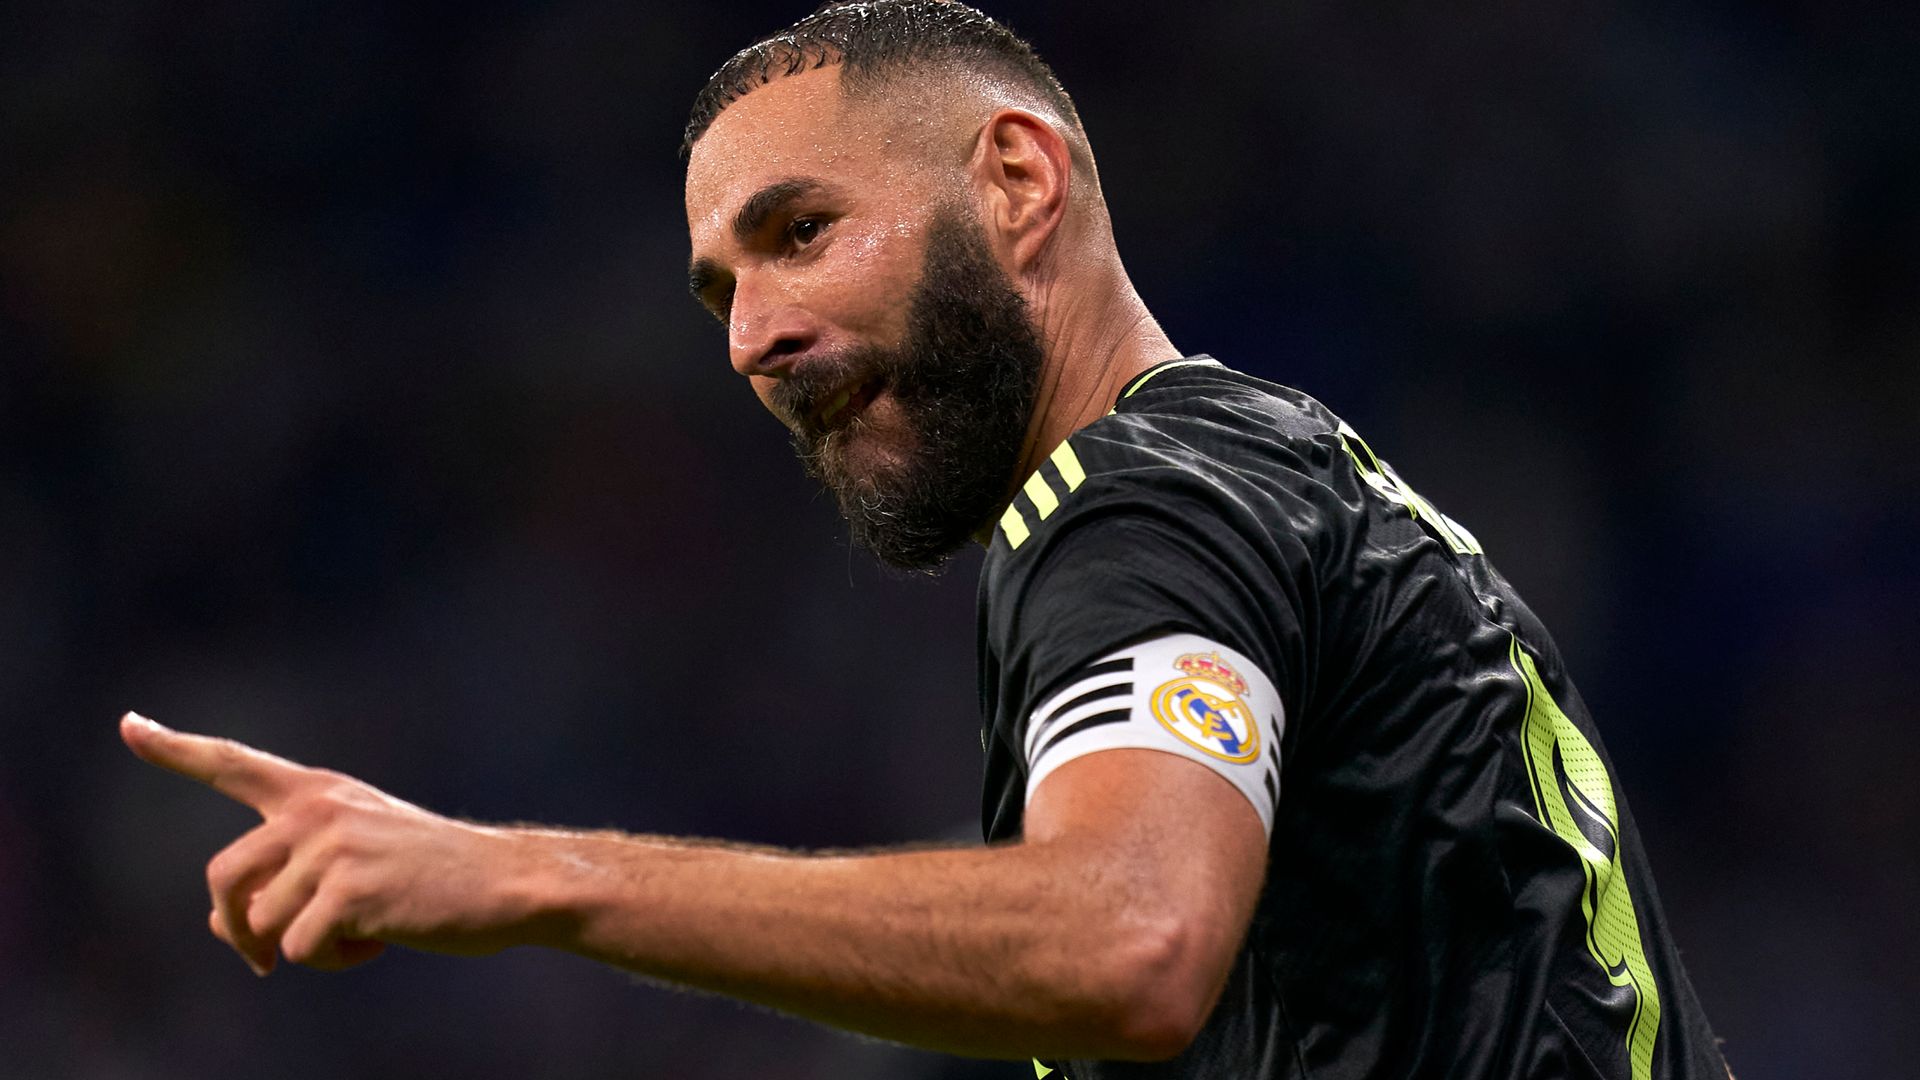 FIFA 23: Benzema is highest-ranked player while Ronaldo and Kane tumble